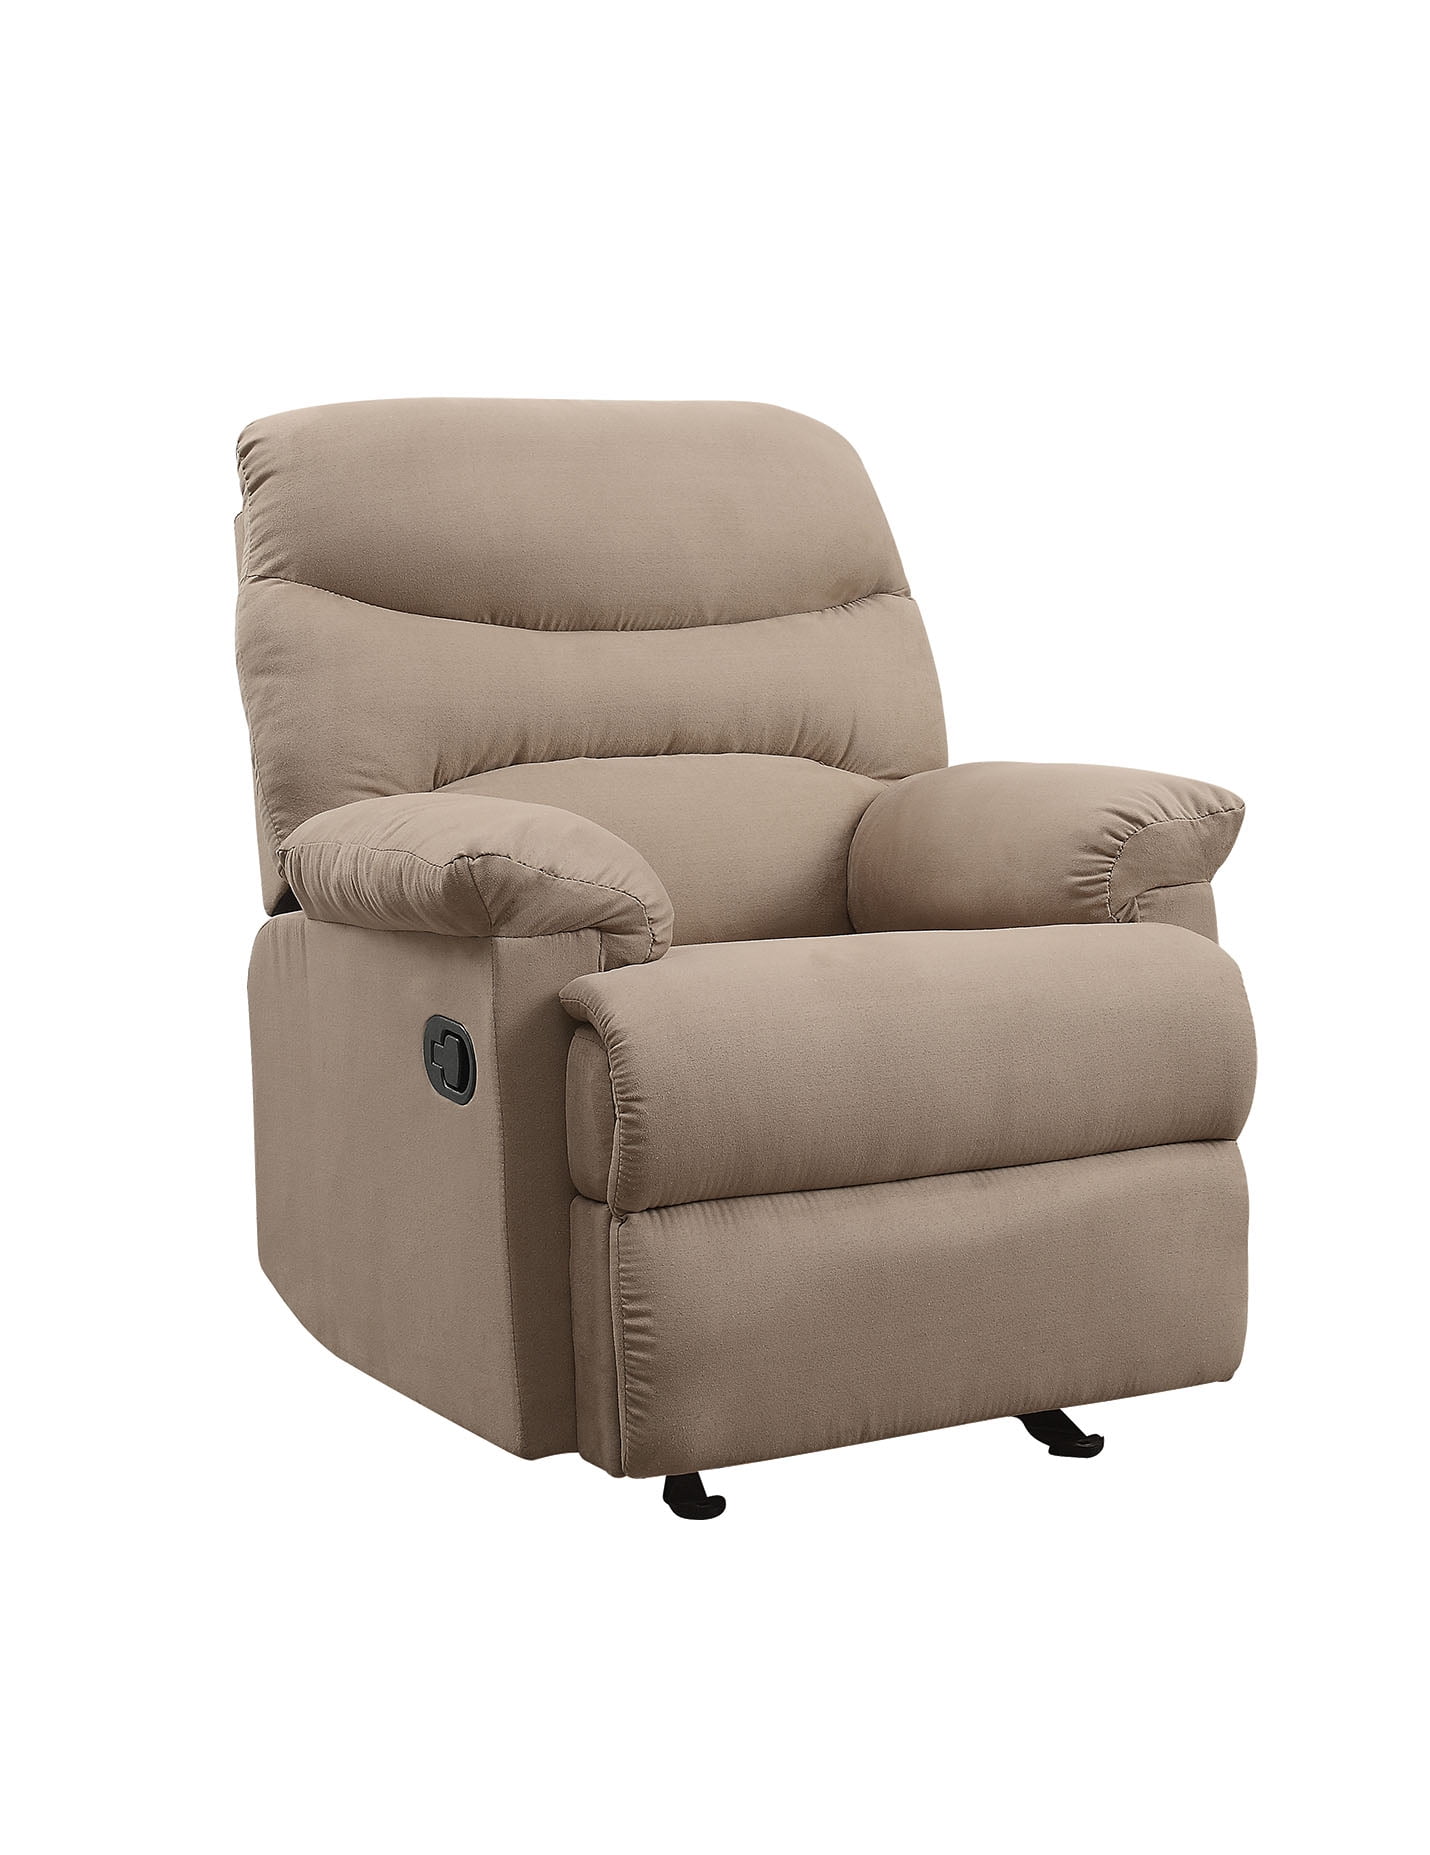 Picture of Acme Furniture 00627 40 x 35 x 35 in. Arcadia Motion Recliner, Light Brown Microfiber